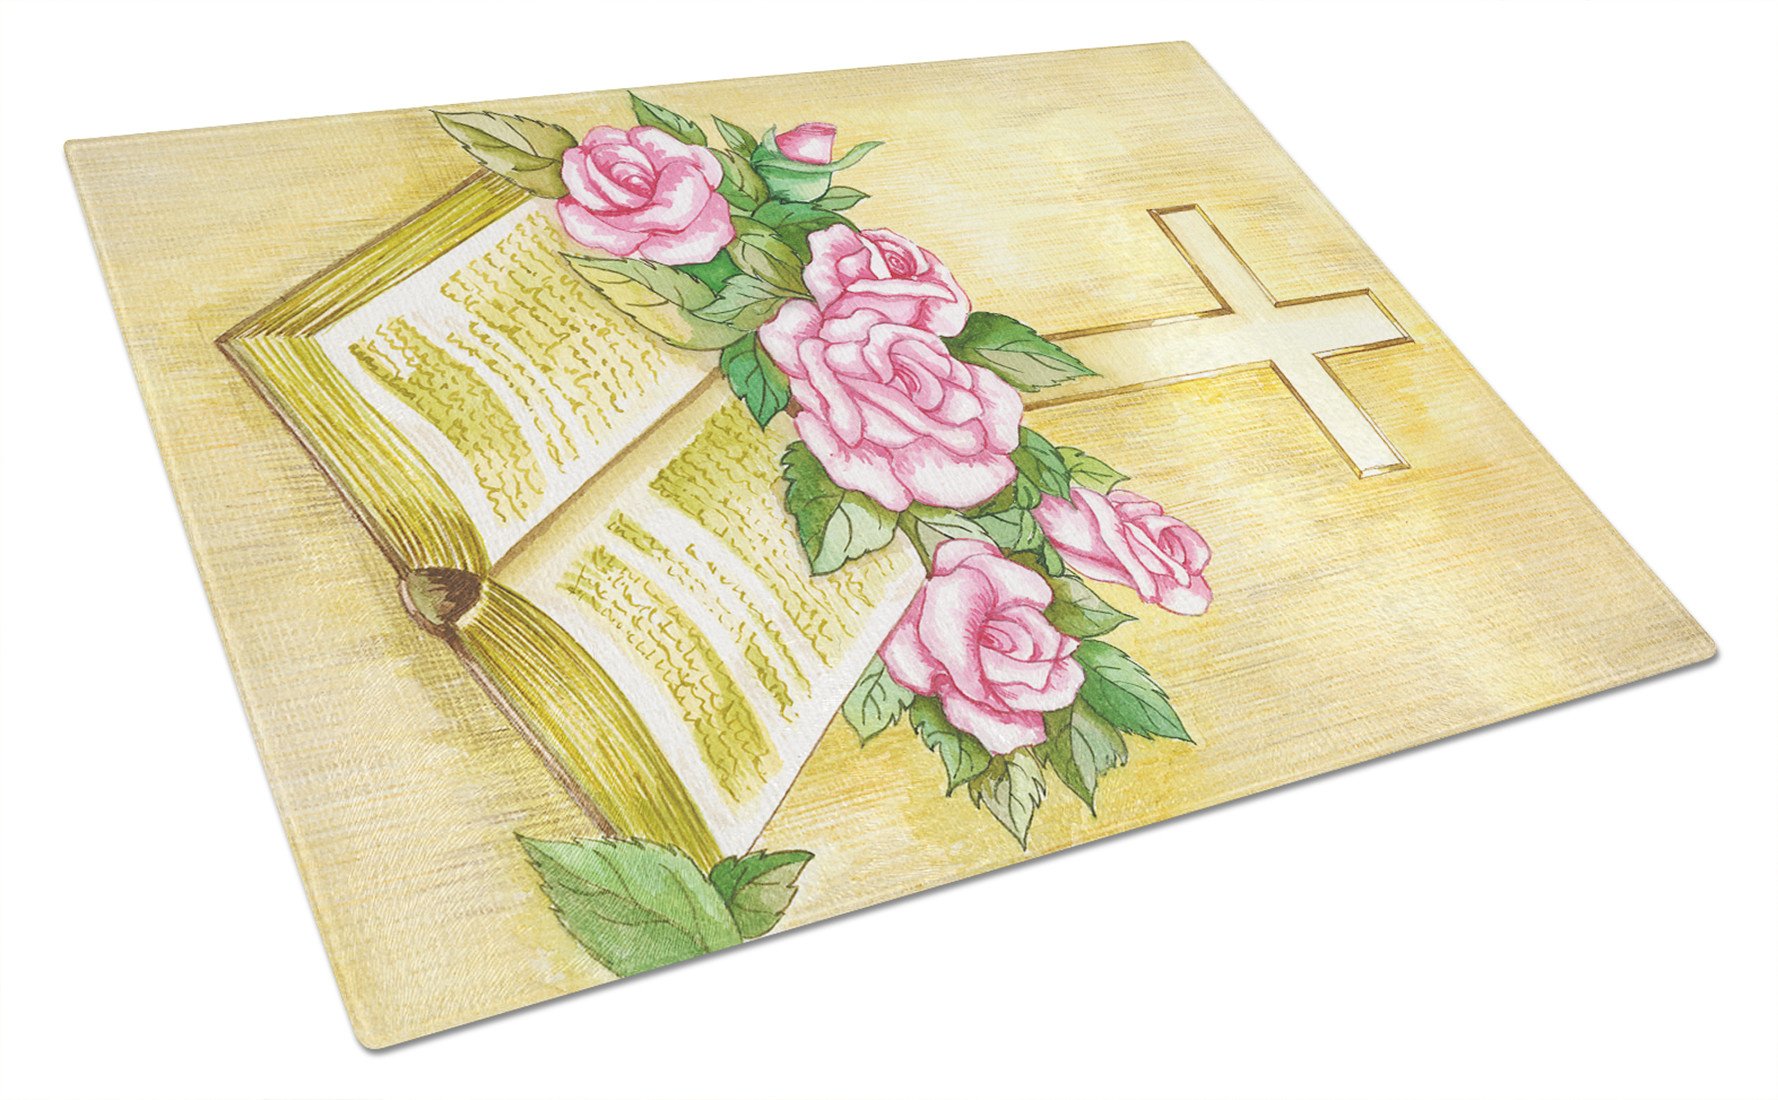 Easter Cross and Bible with Roses Glass Cutting Board Large APH4072LCB by Caroline's Treasures